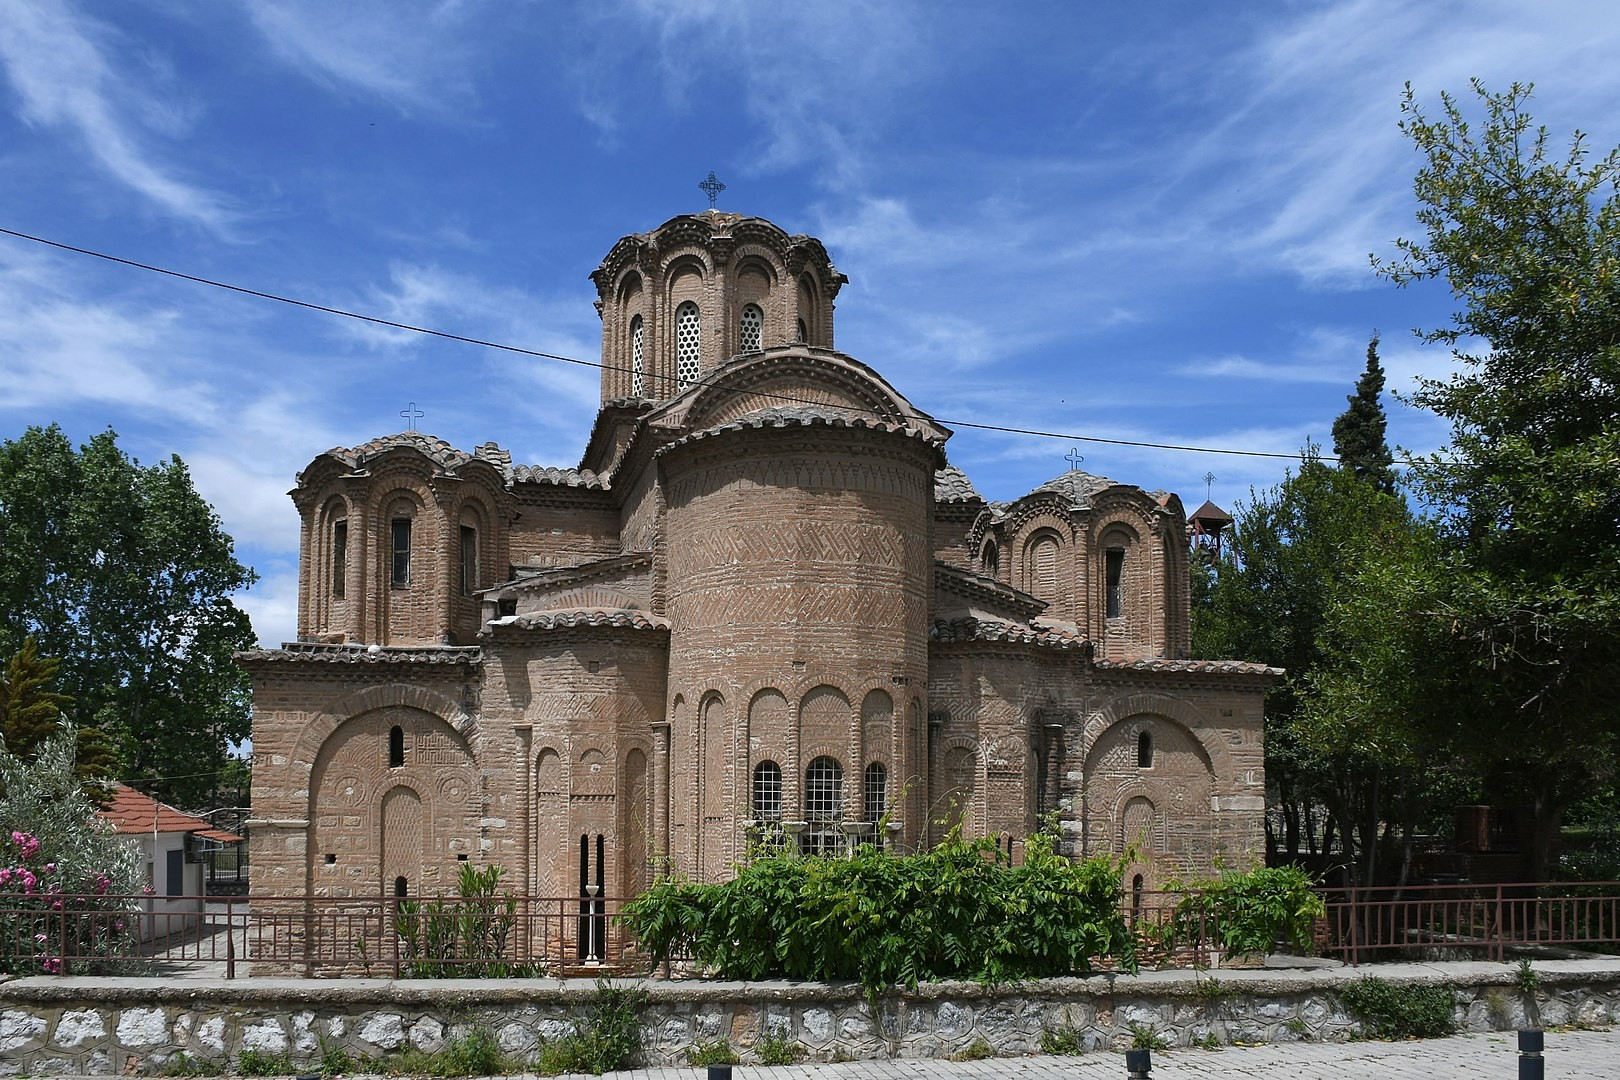 By Herbert Frank from Wien (Vienna), AT - Thessaloniki, Kirche der Heiligen Apostel (Ναός Αγίων Αποστόλων) (14. Jhdt.), CC BY 2.0, https://commons.wikimedia.org/w/index.php?curid=78974074